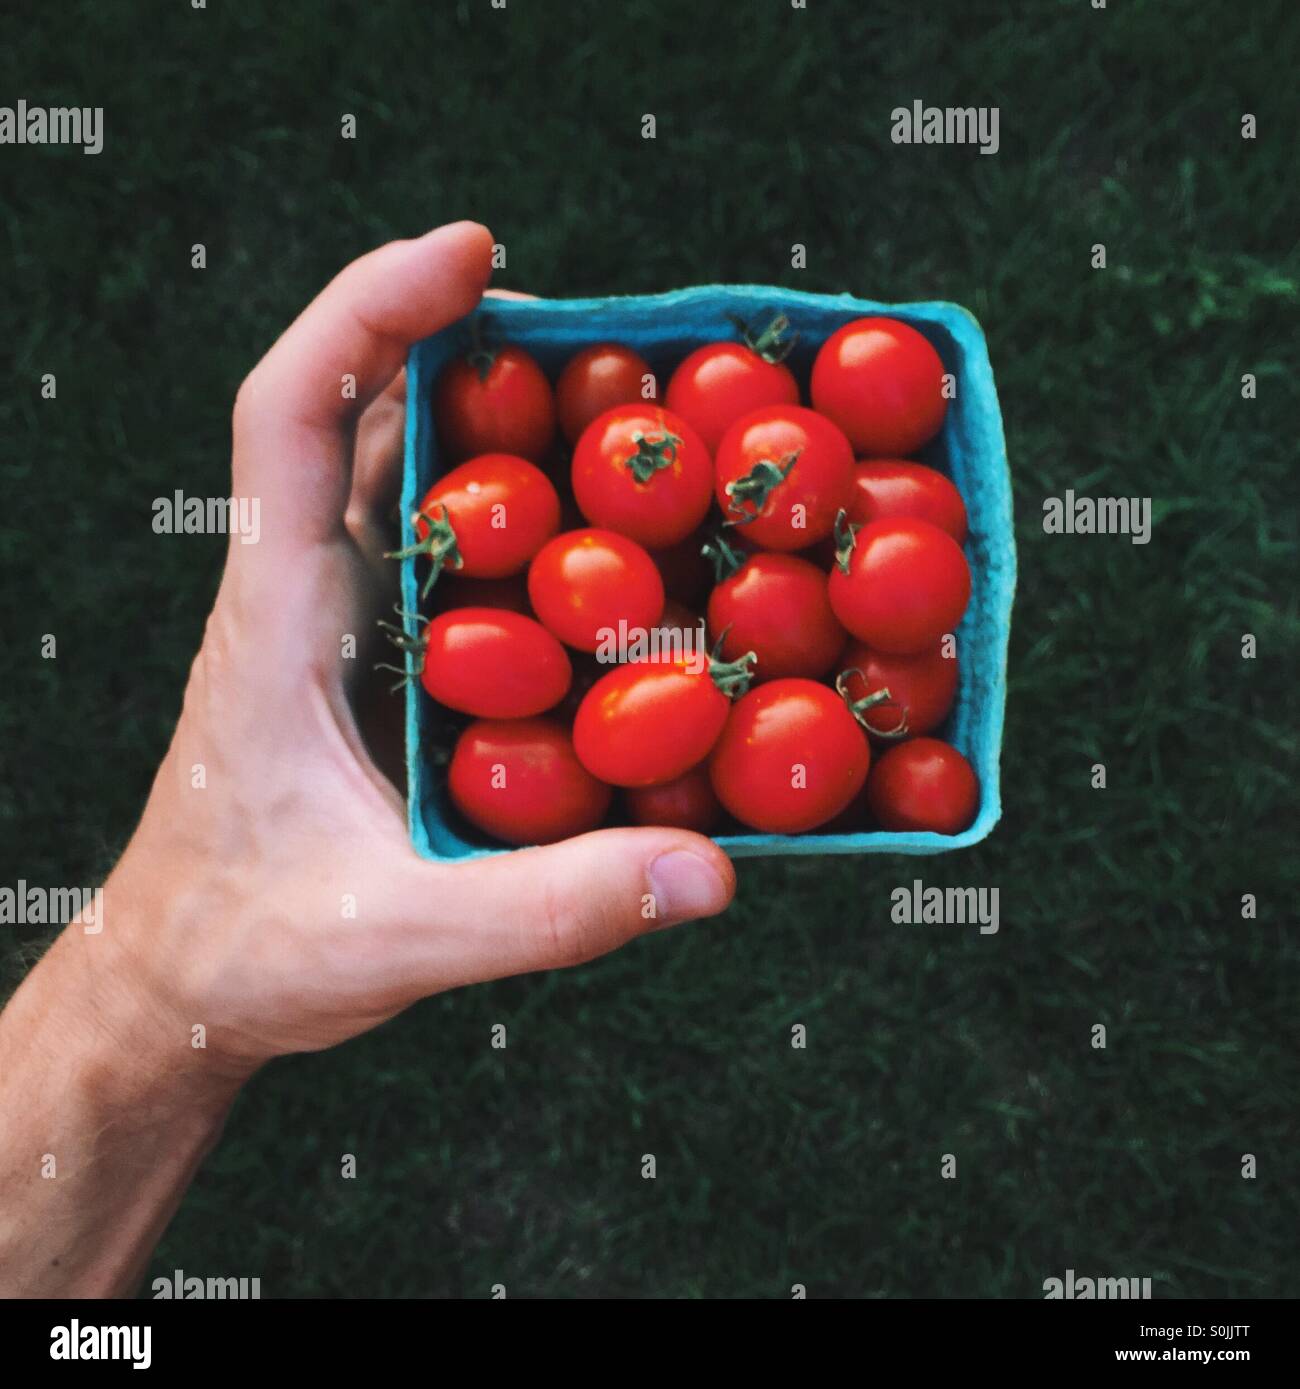 Hand with red tomatoes Stock Photo